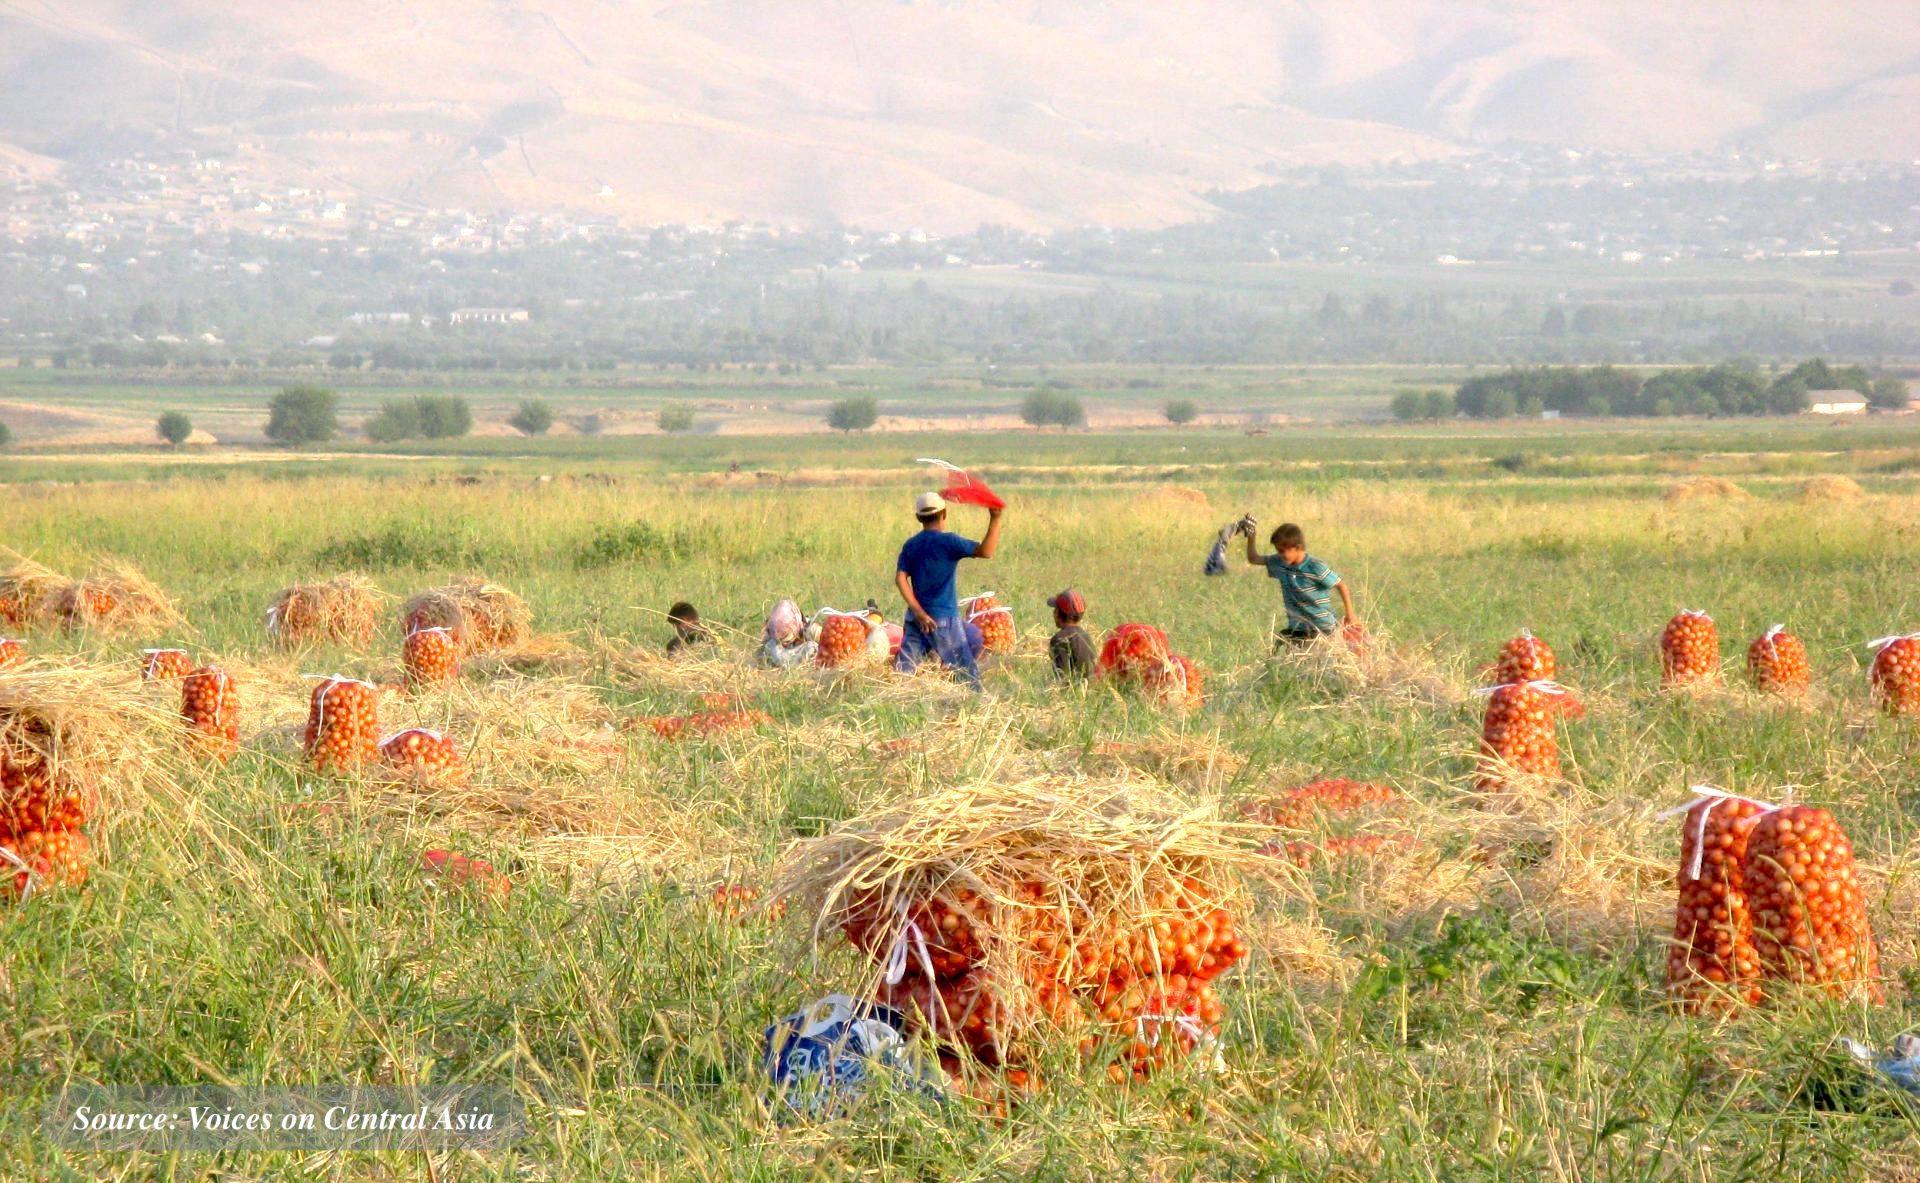 Caspian Policy Center Perspective: Food Security in Central Asia during an Economic Downturn